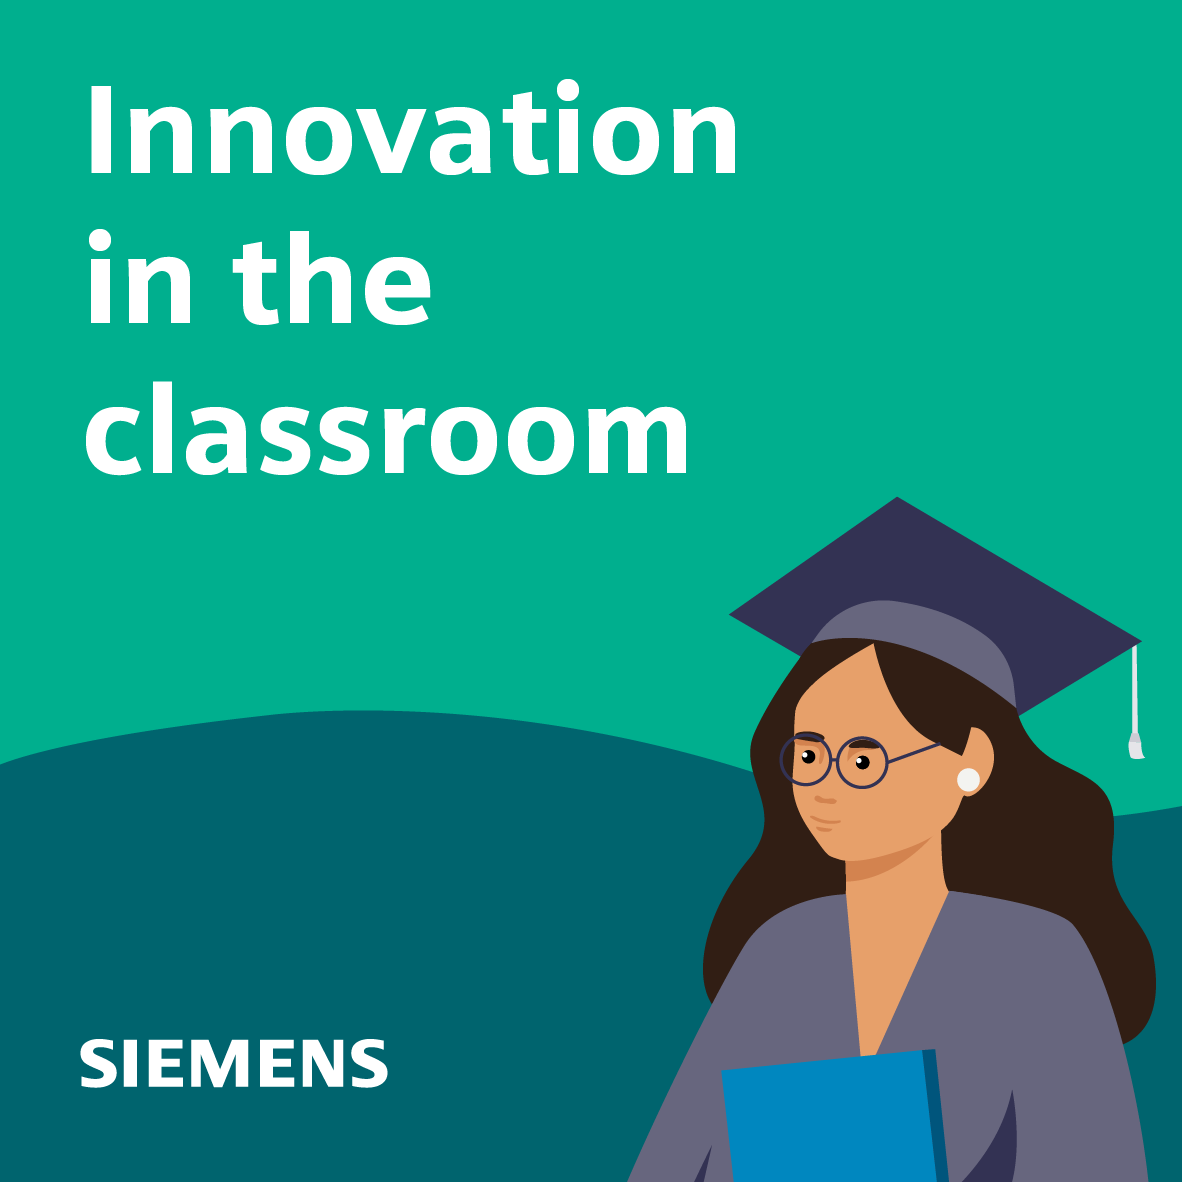 Innovation in the Classroom Podcast Podcast